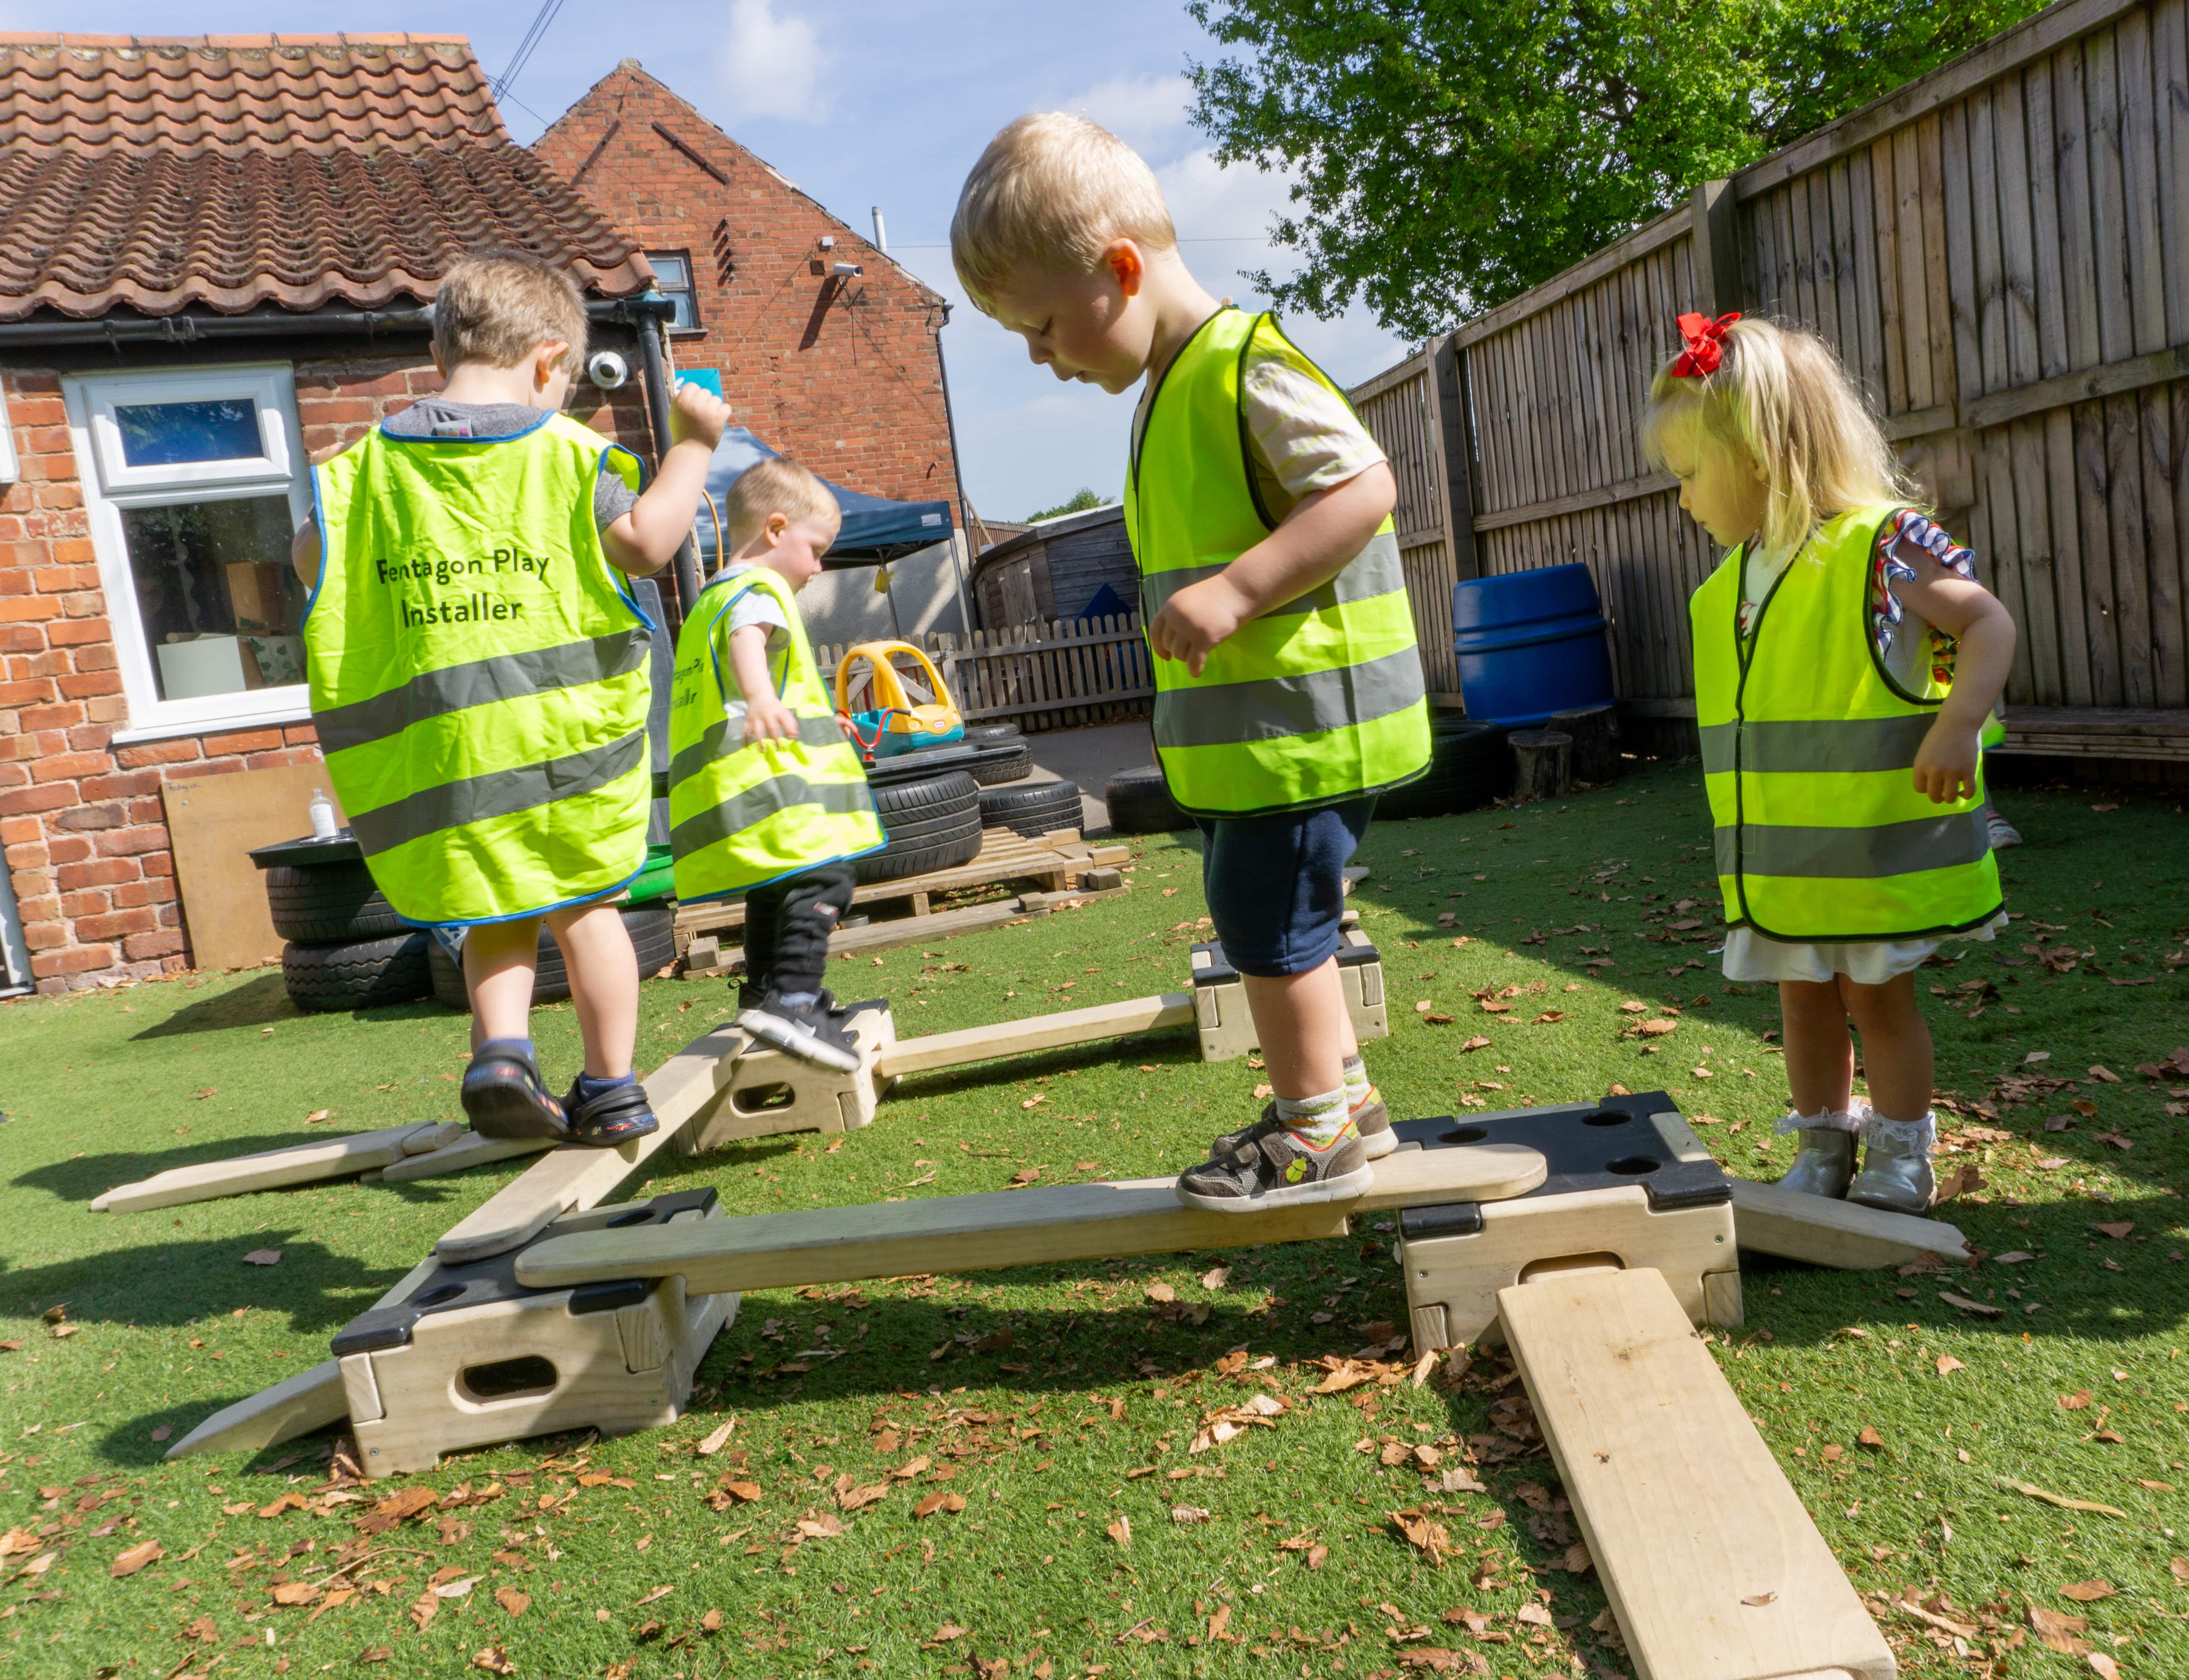 4 children are wearing hi-vis jackets which say "Pentagon Play Installer" on the back of them. The children have built a small obstacle course with the Play Builder set, which is set up in the playground of Kindred White Post.